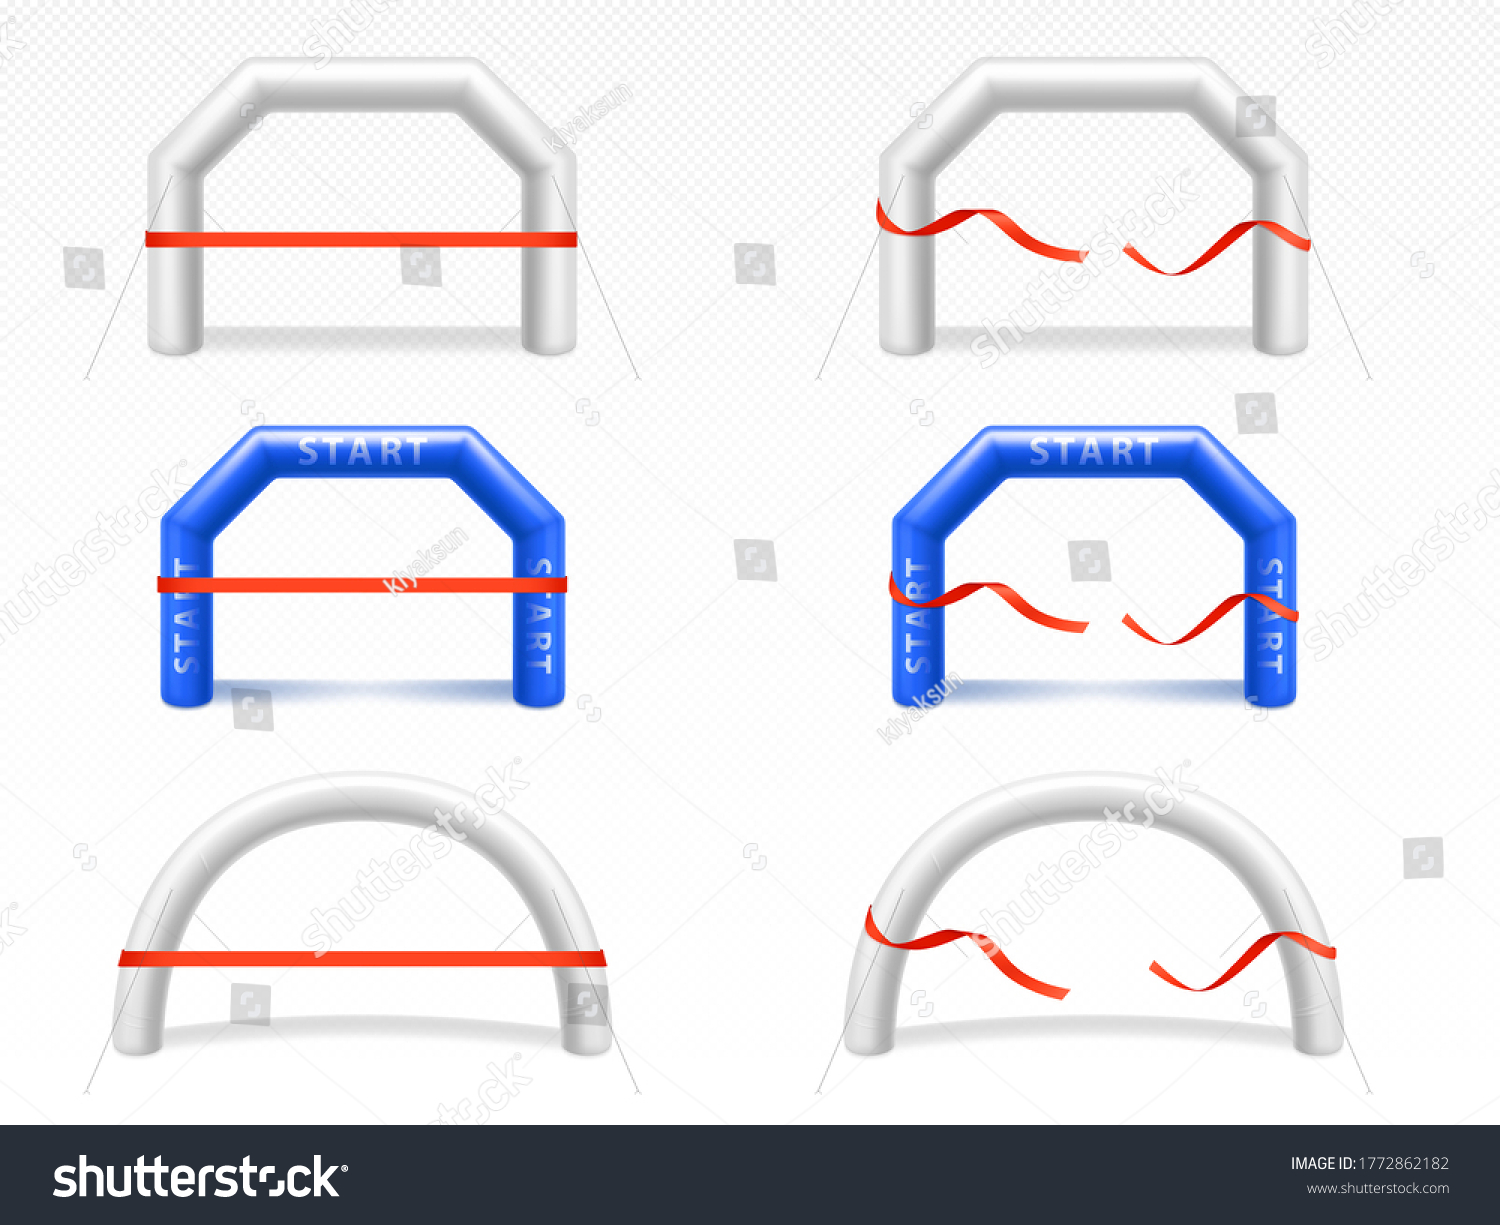 SVG of White and blue inflatable arch for sport running race  events, marathon or triathlon. Vector realistic set of blank balloon tubes different shapes for start and finish line with torn red ribbon svg